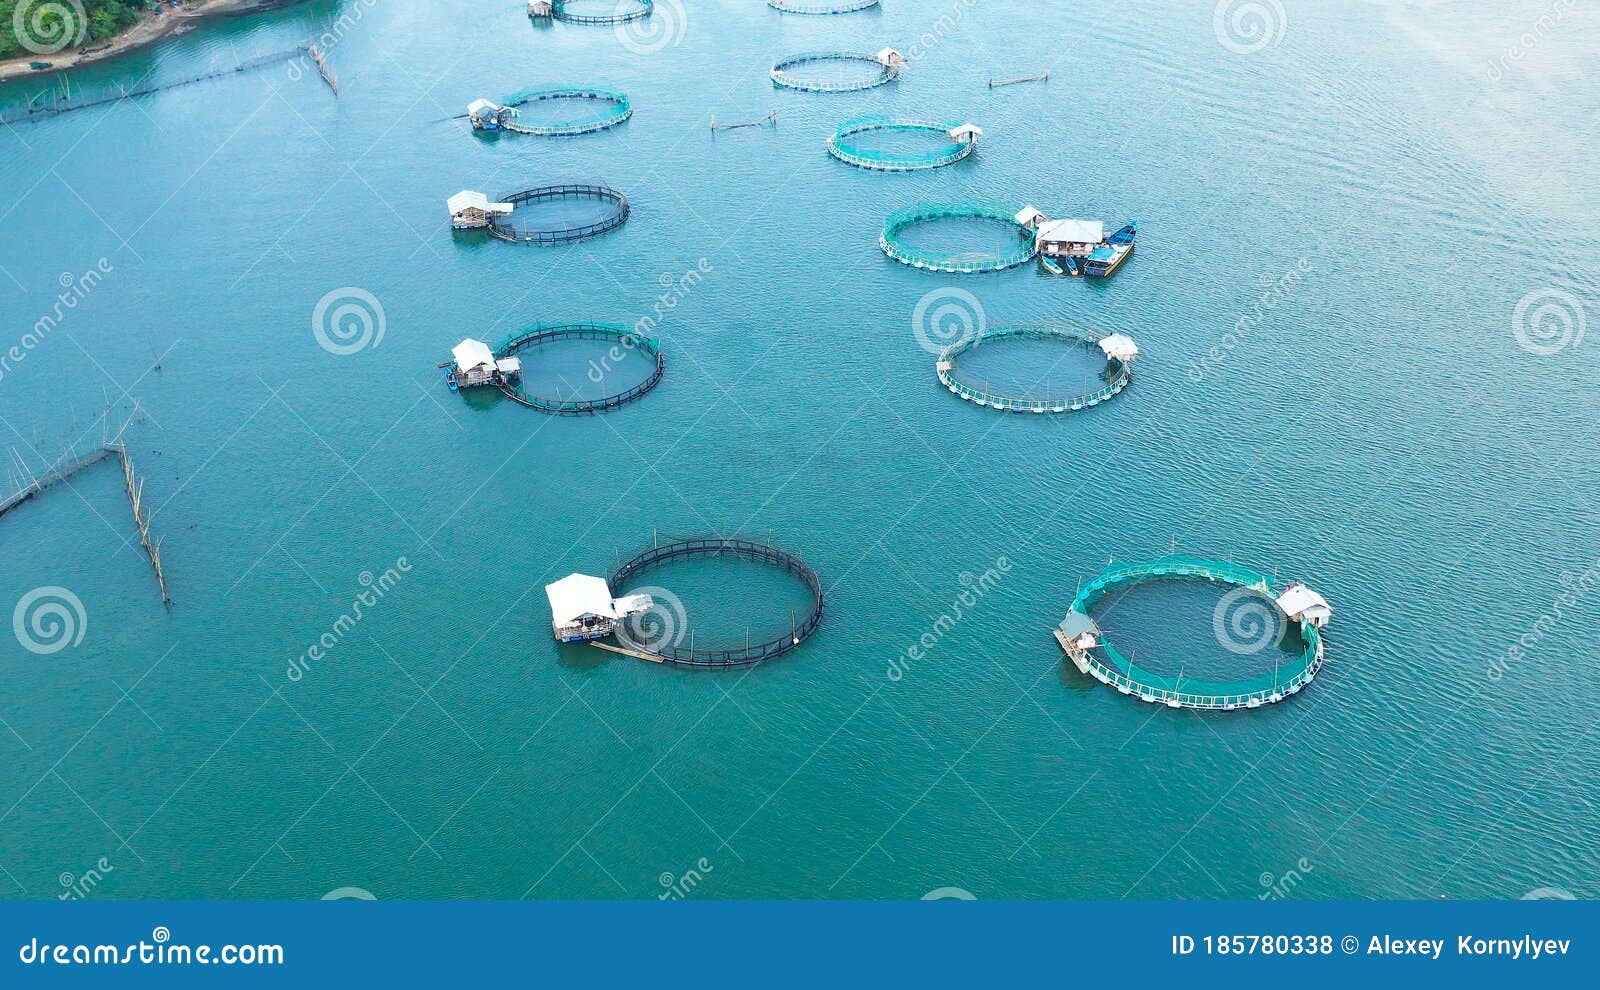 Fisheries on Luzon Island, Philippines. Fish Farm, Top View. Stock Photo -  Image of business, blue: 185780338